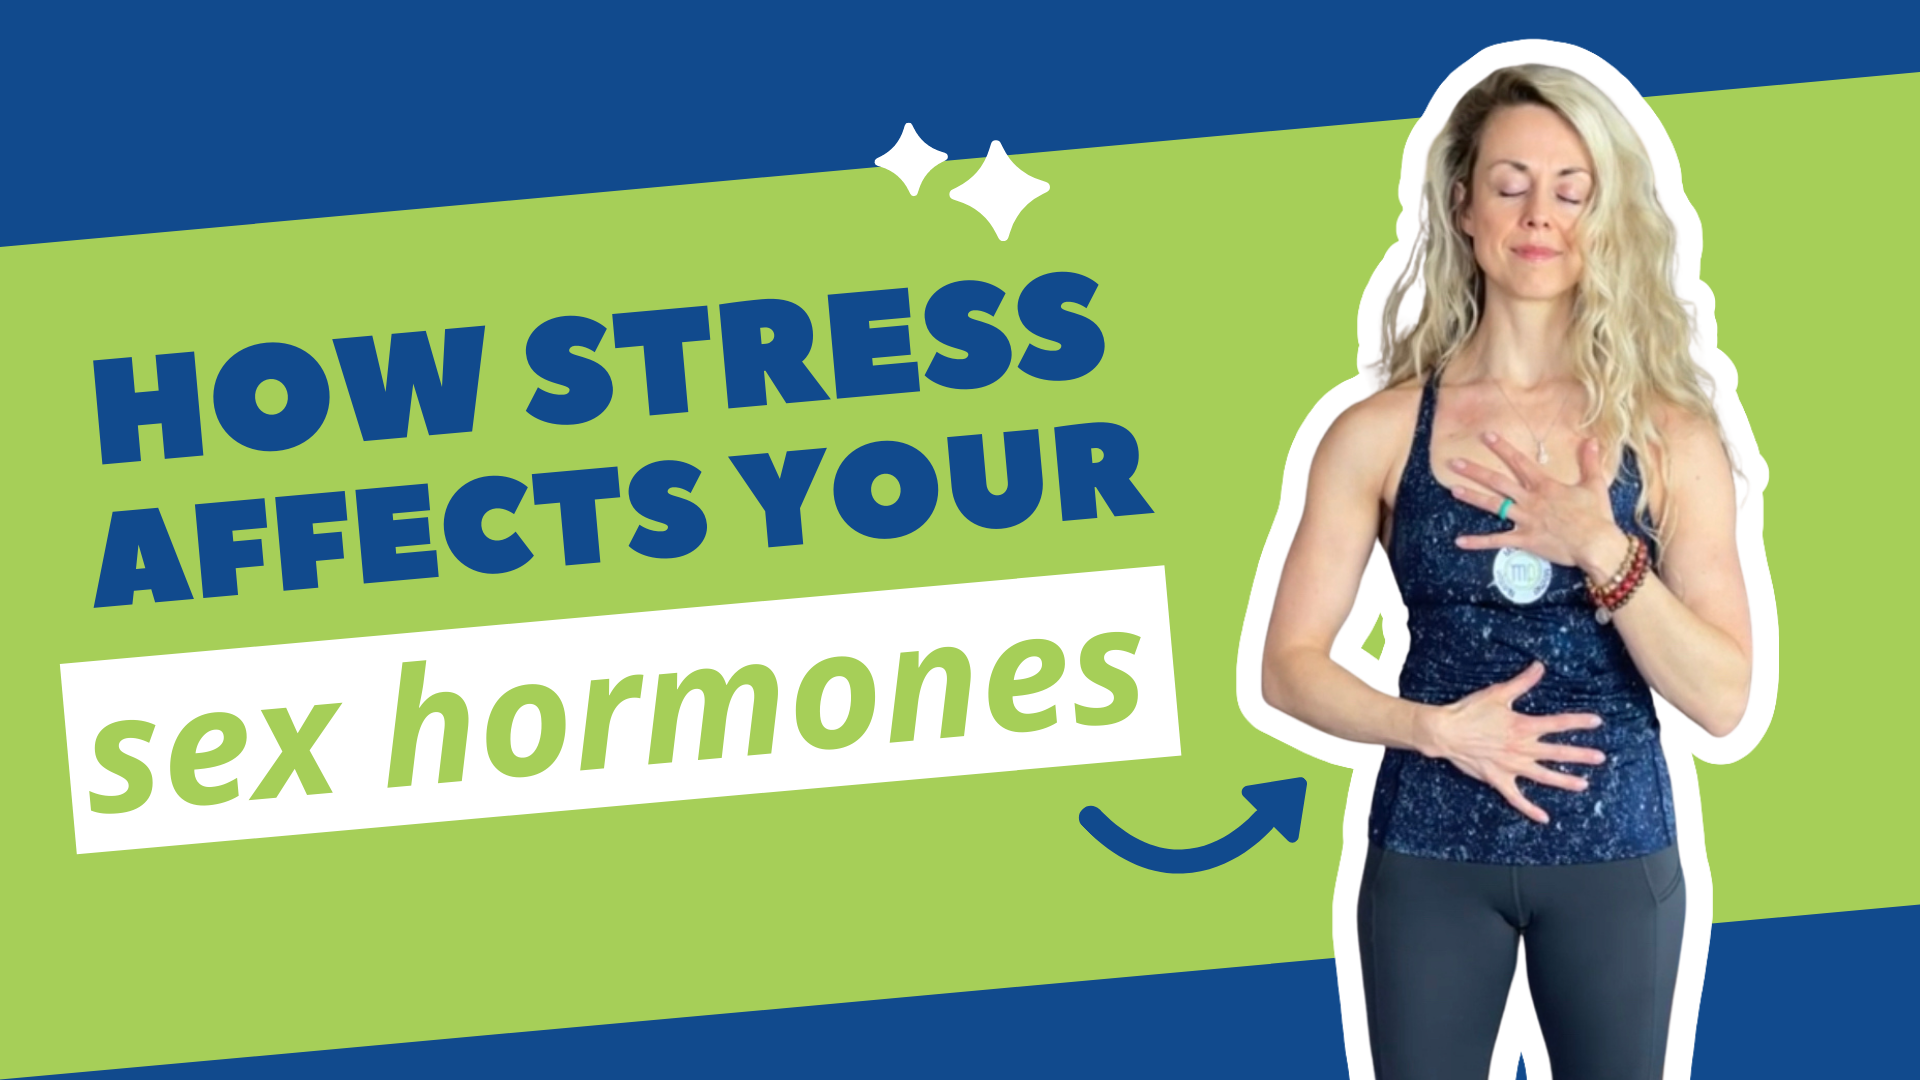 How stress affects your sex hormones￼￼